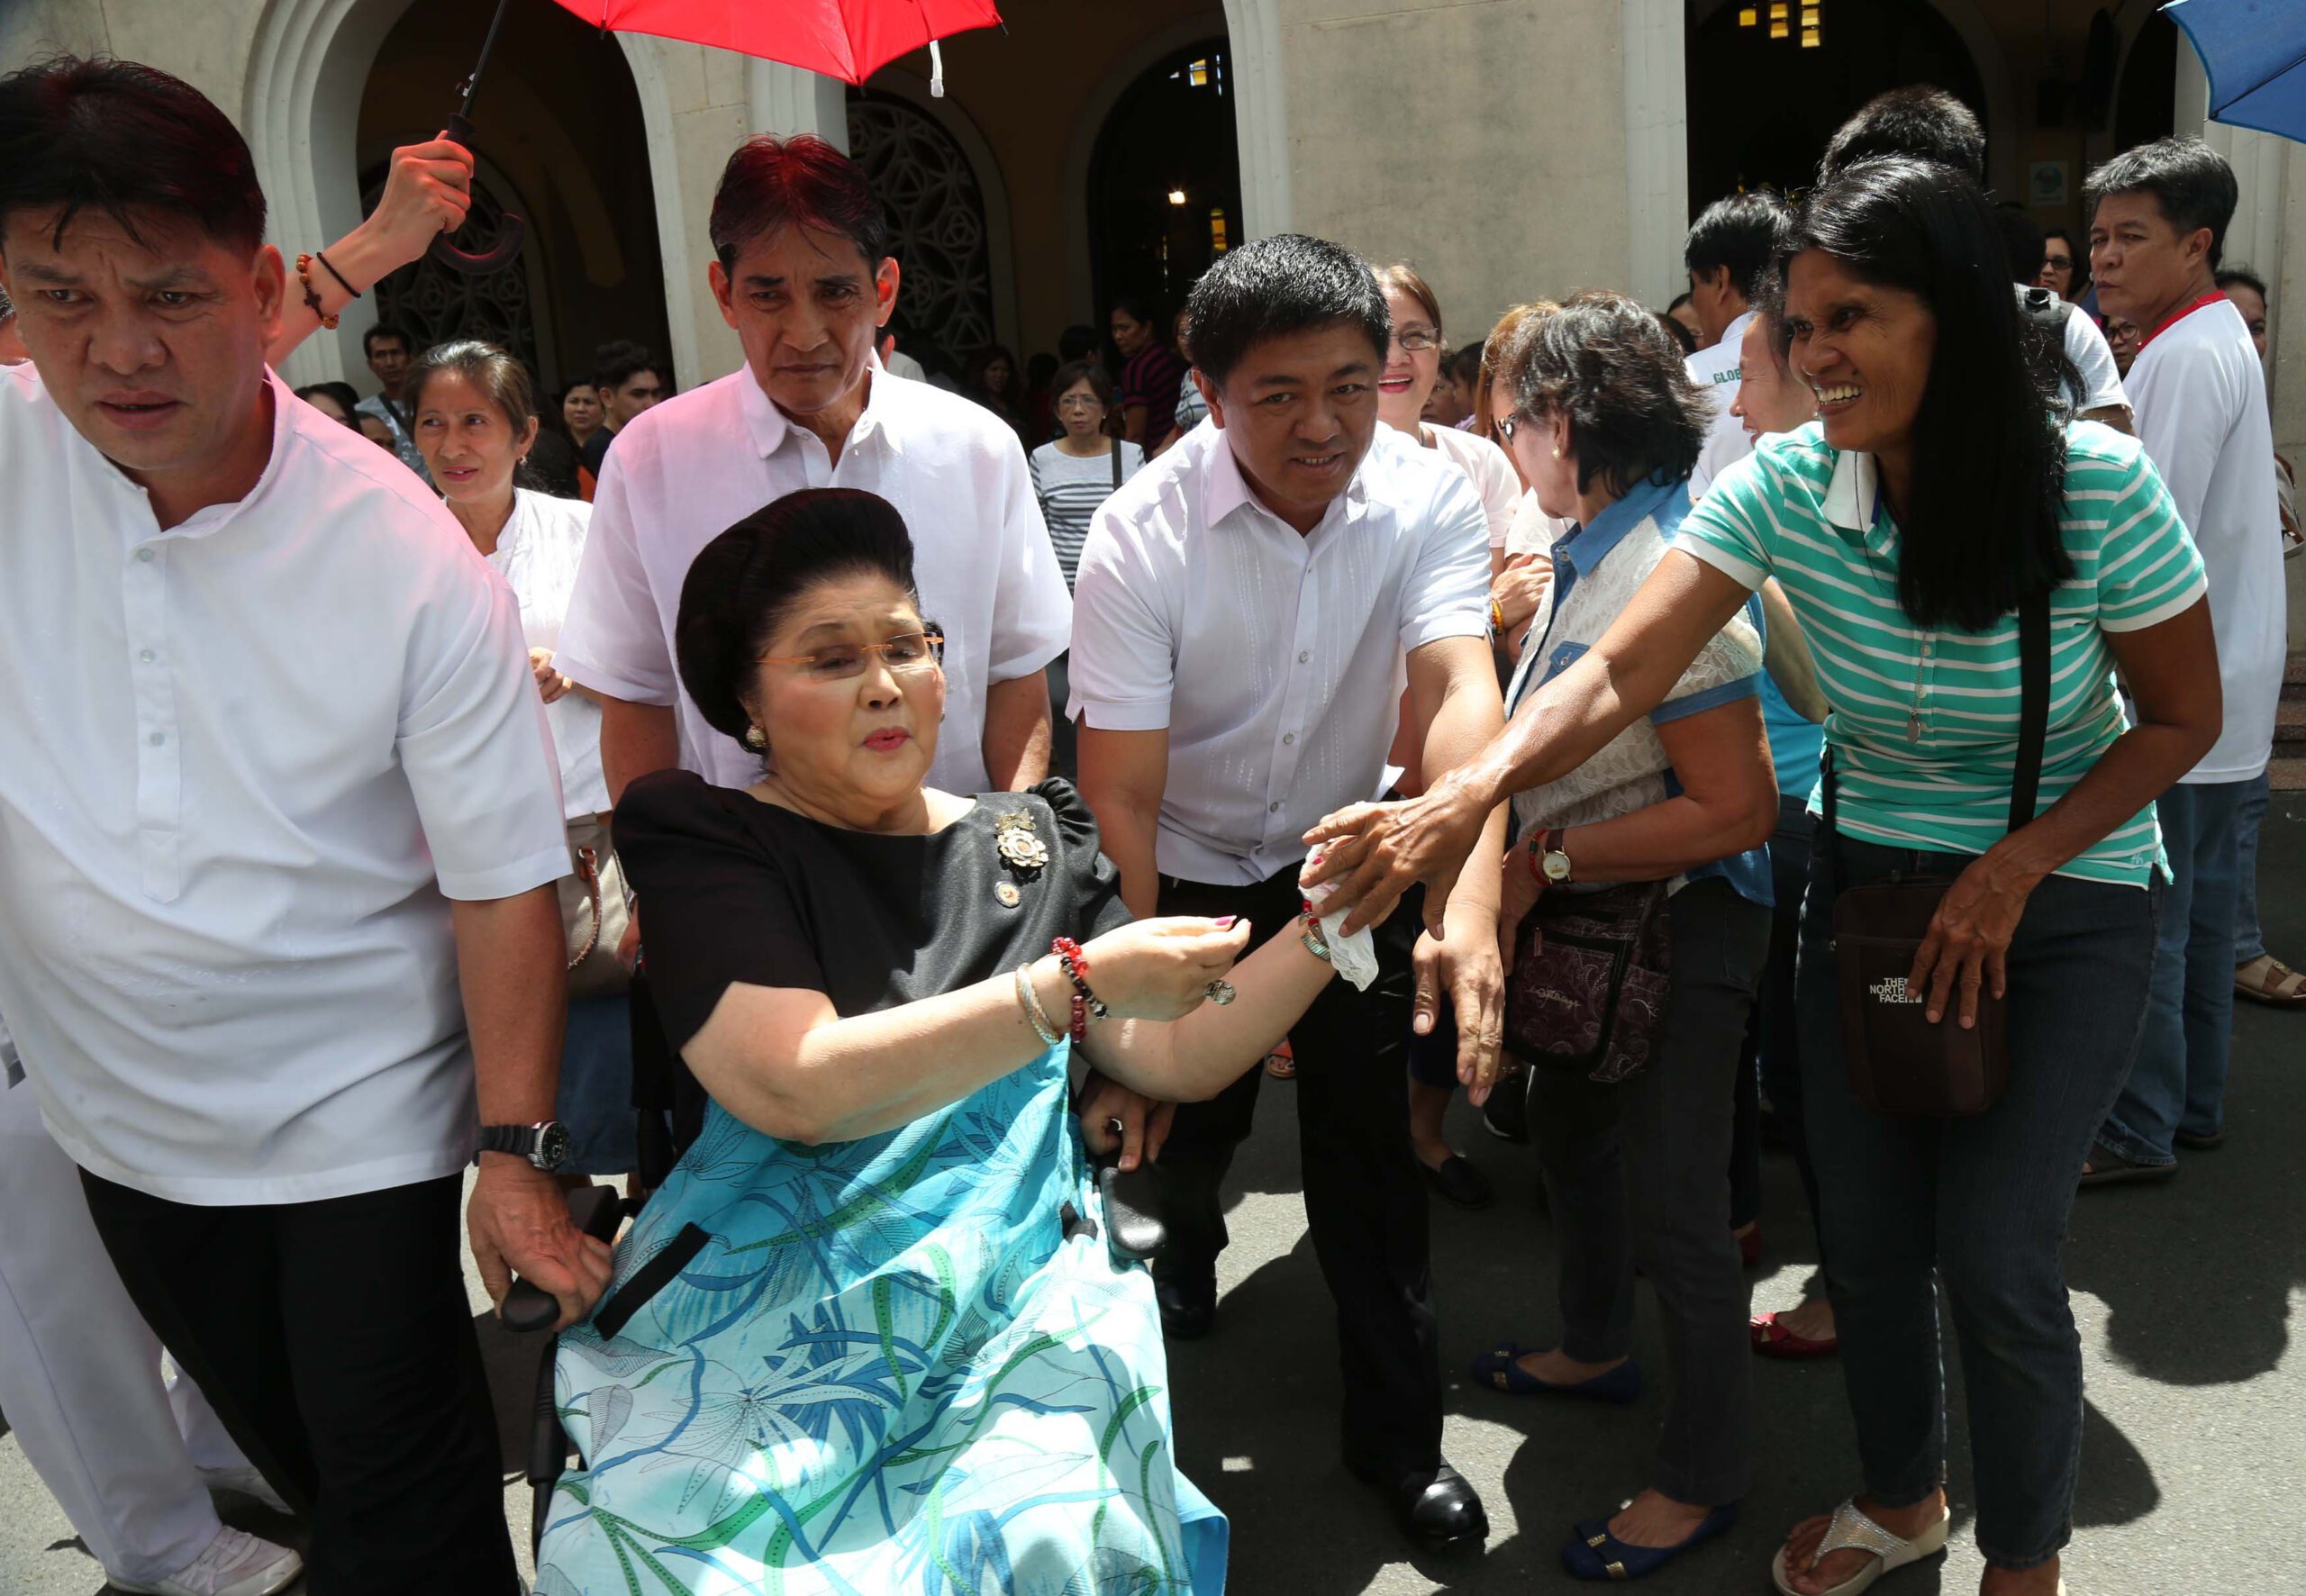 Imelda Marcos sits through Mass for victims of husband’s regime